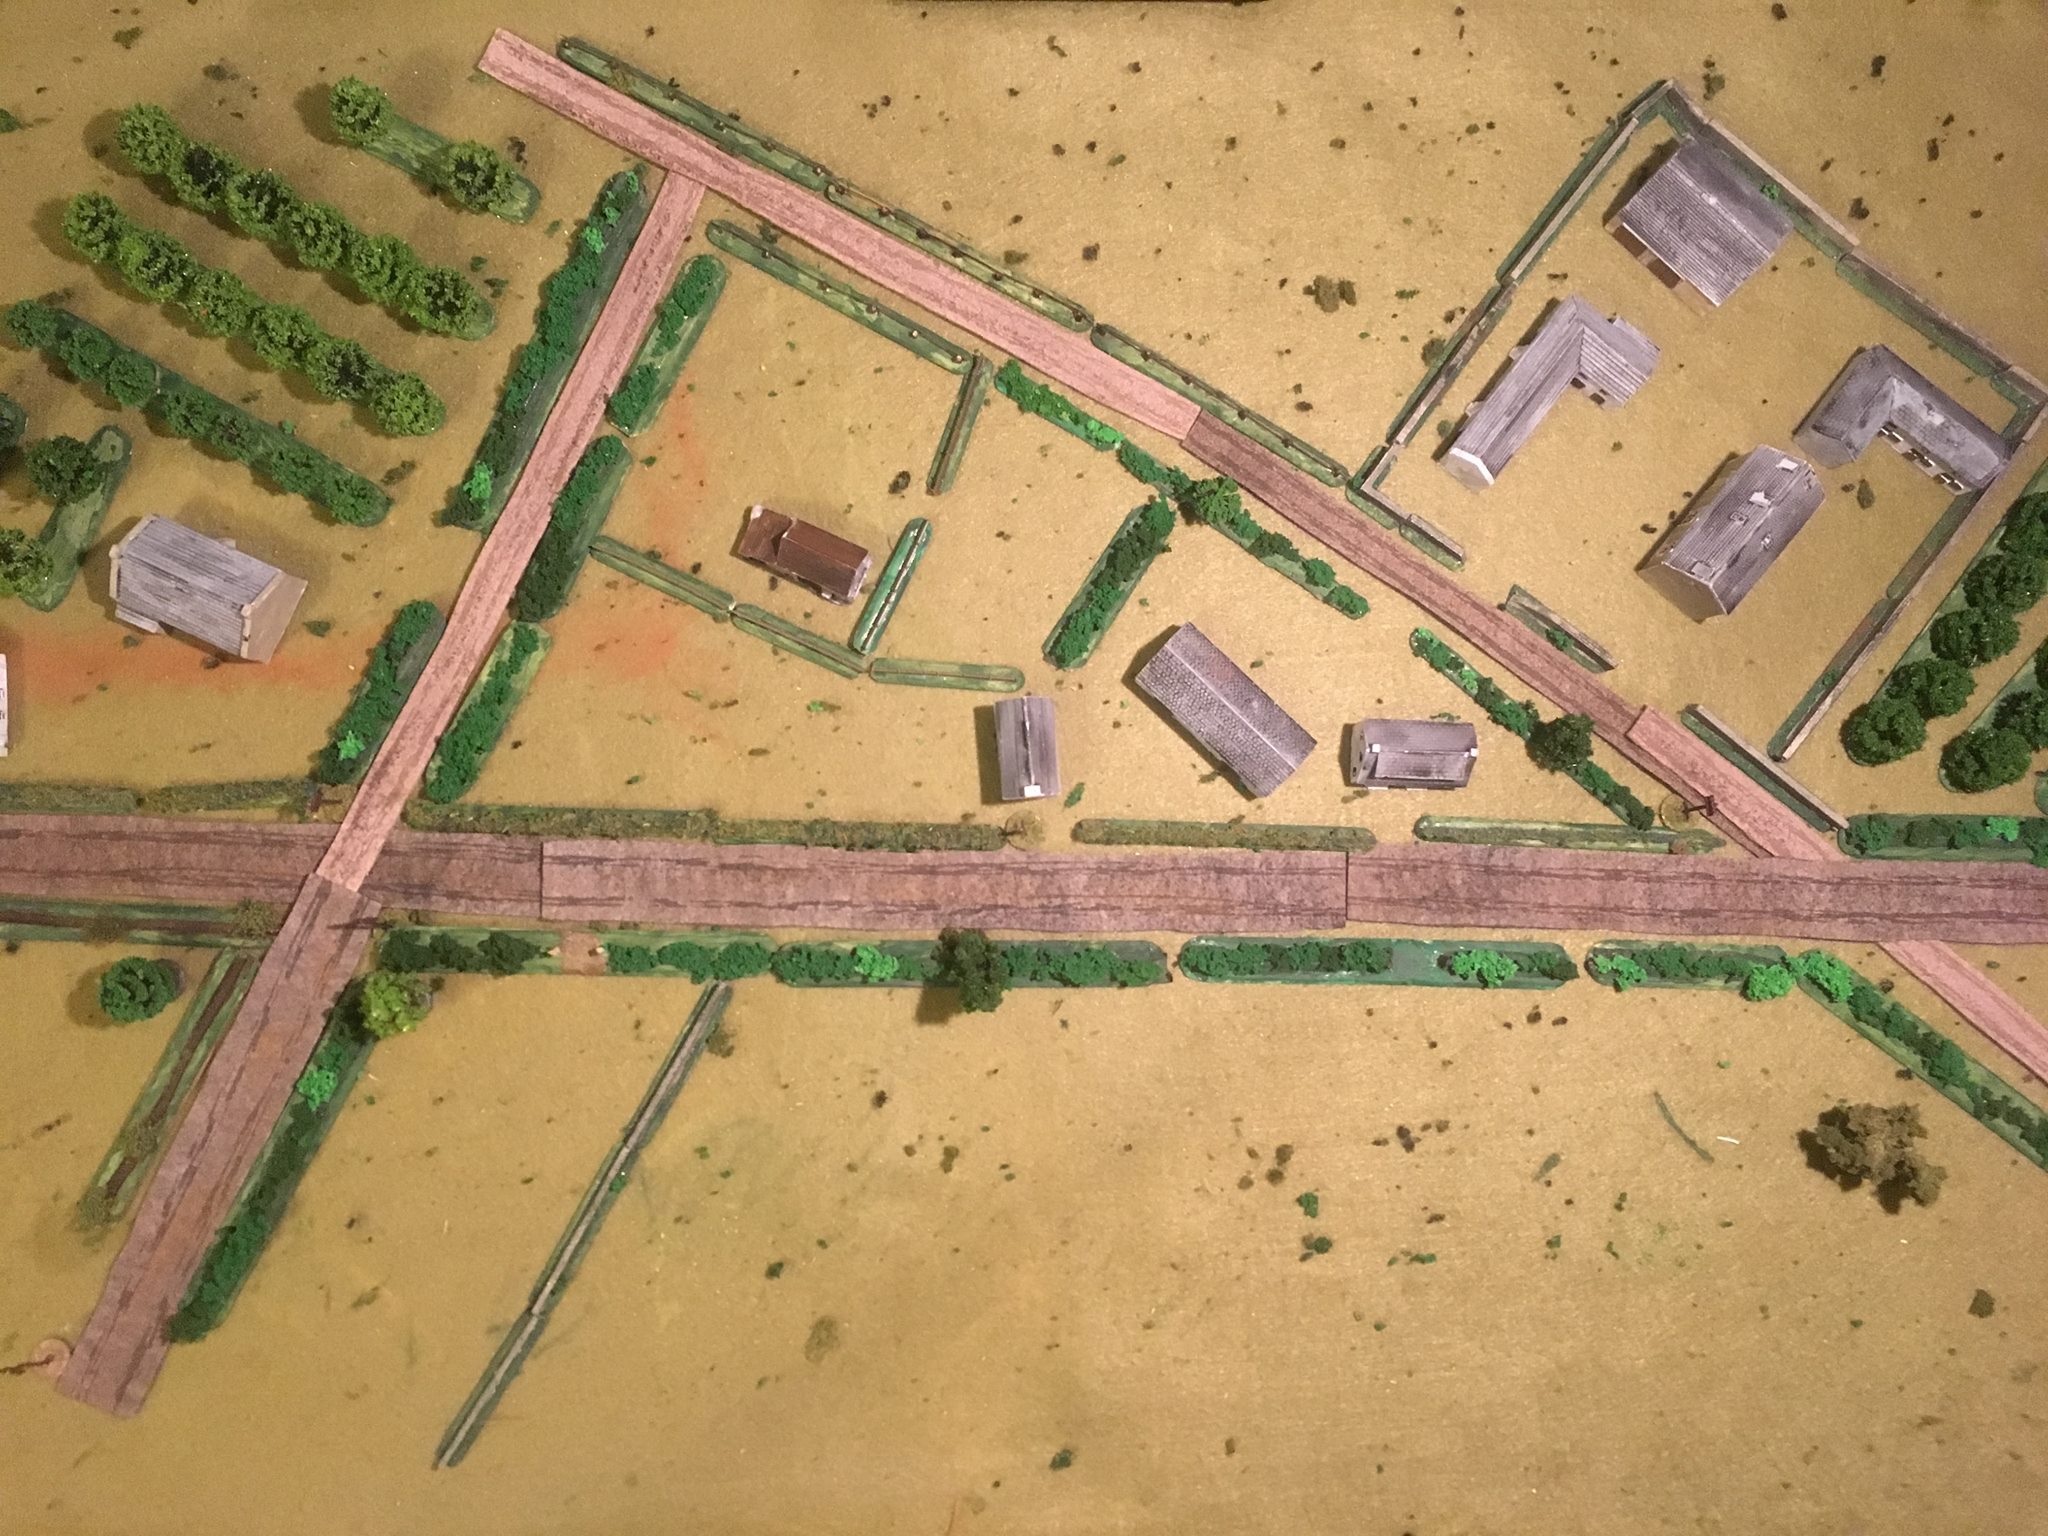  My interpretation of the terrain. The British come in from the orchard on the left and the Germans hold the farm complex and the buildings in the centre. 